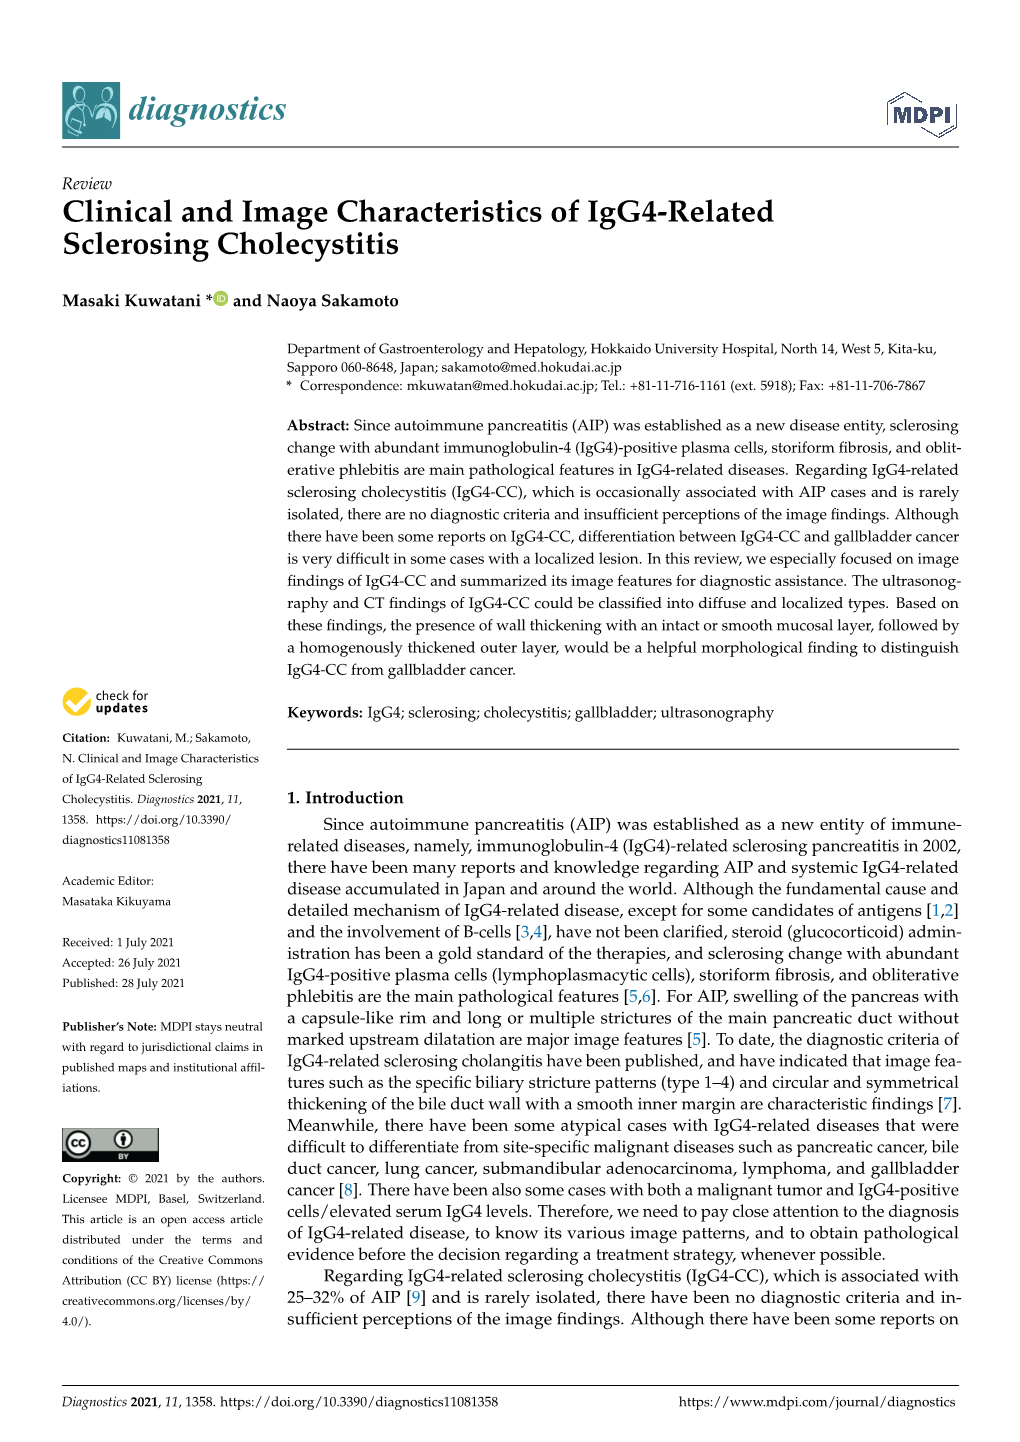 Clinical and Image Characteristics of Igg4-Related Sclerosing Cholecystitis